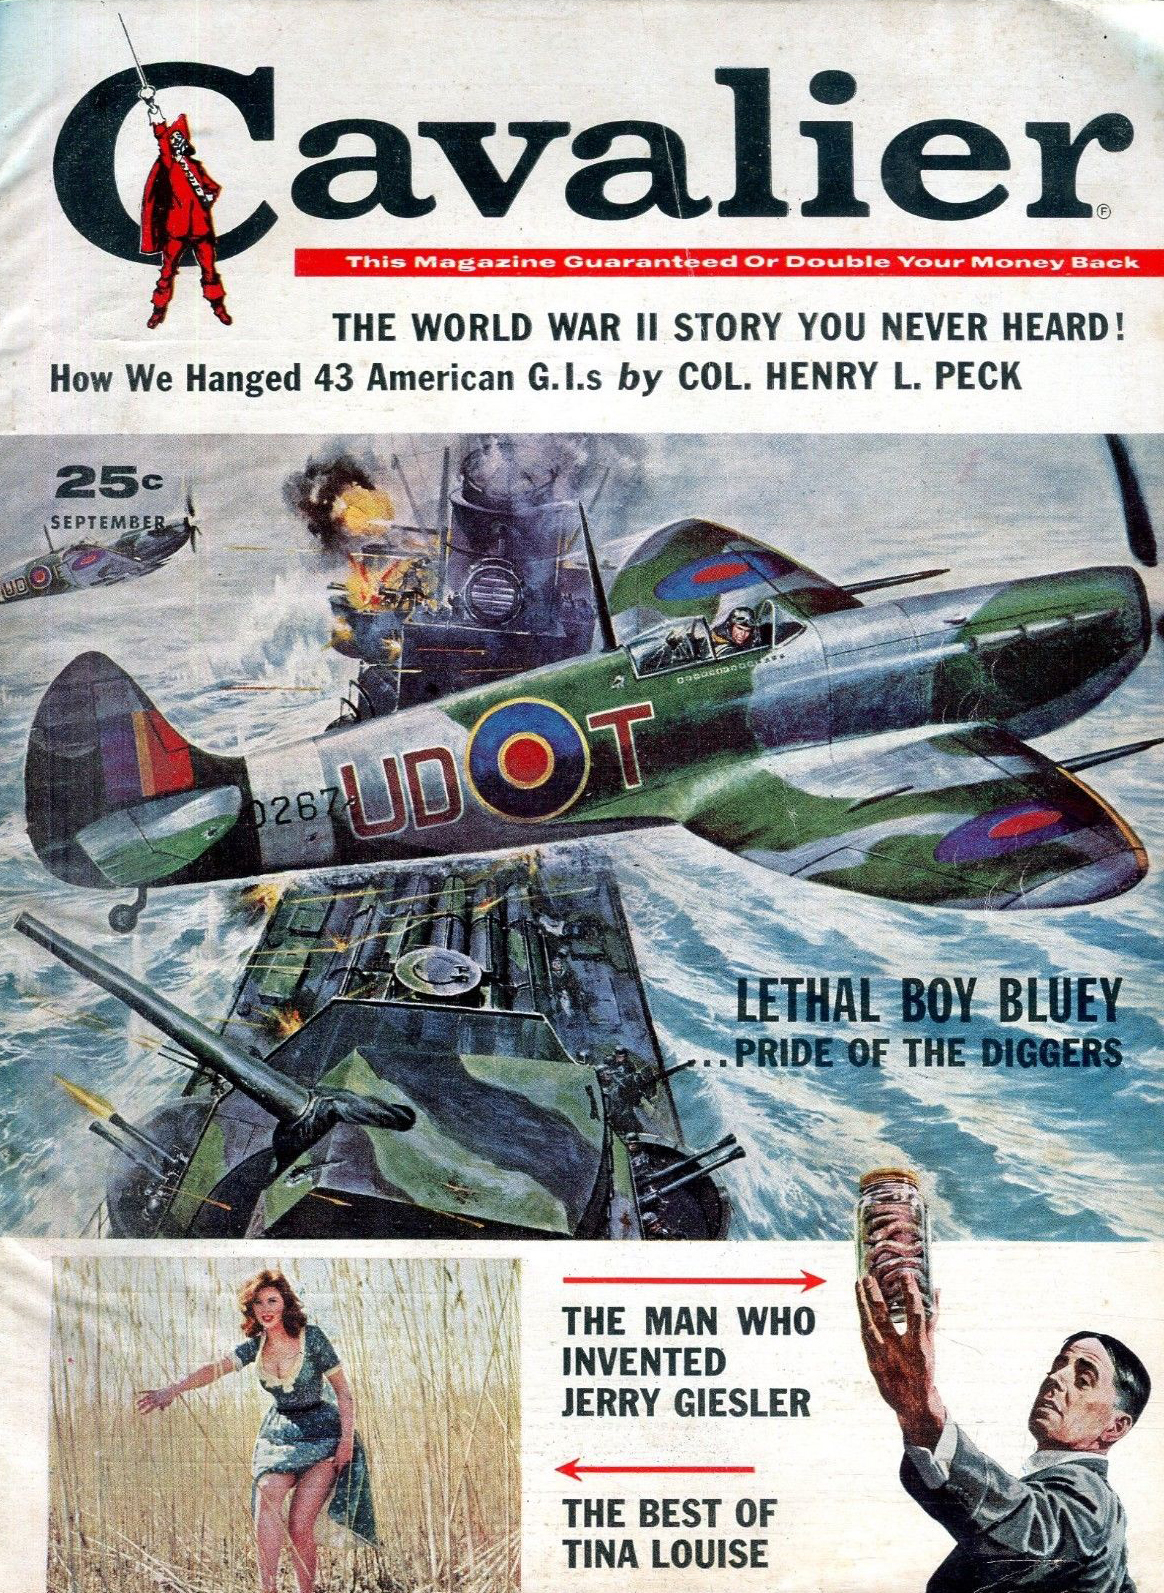 Cavalier September 1960 magazine back issue Cavalier magizine back copy Cavalier September 1960 Adult Magazine Back Issue Published by Fawcett Publications and Founded in 1952. The World War II Story You Never Heard!.